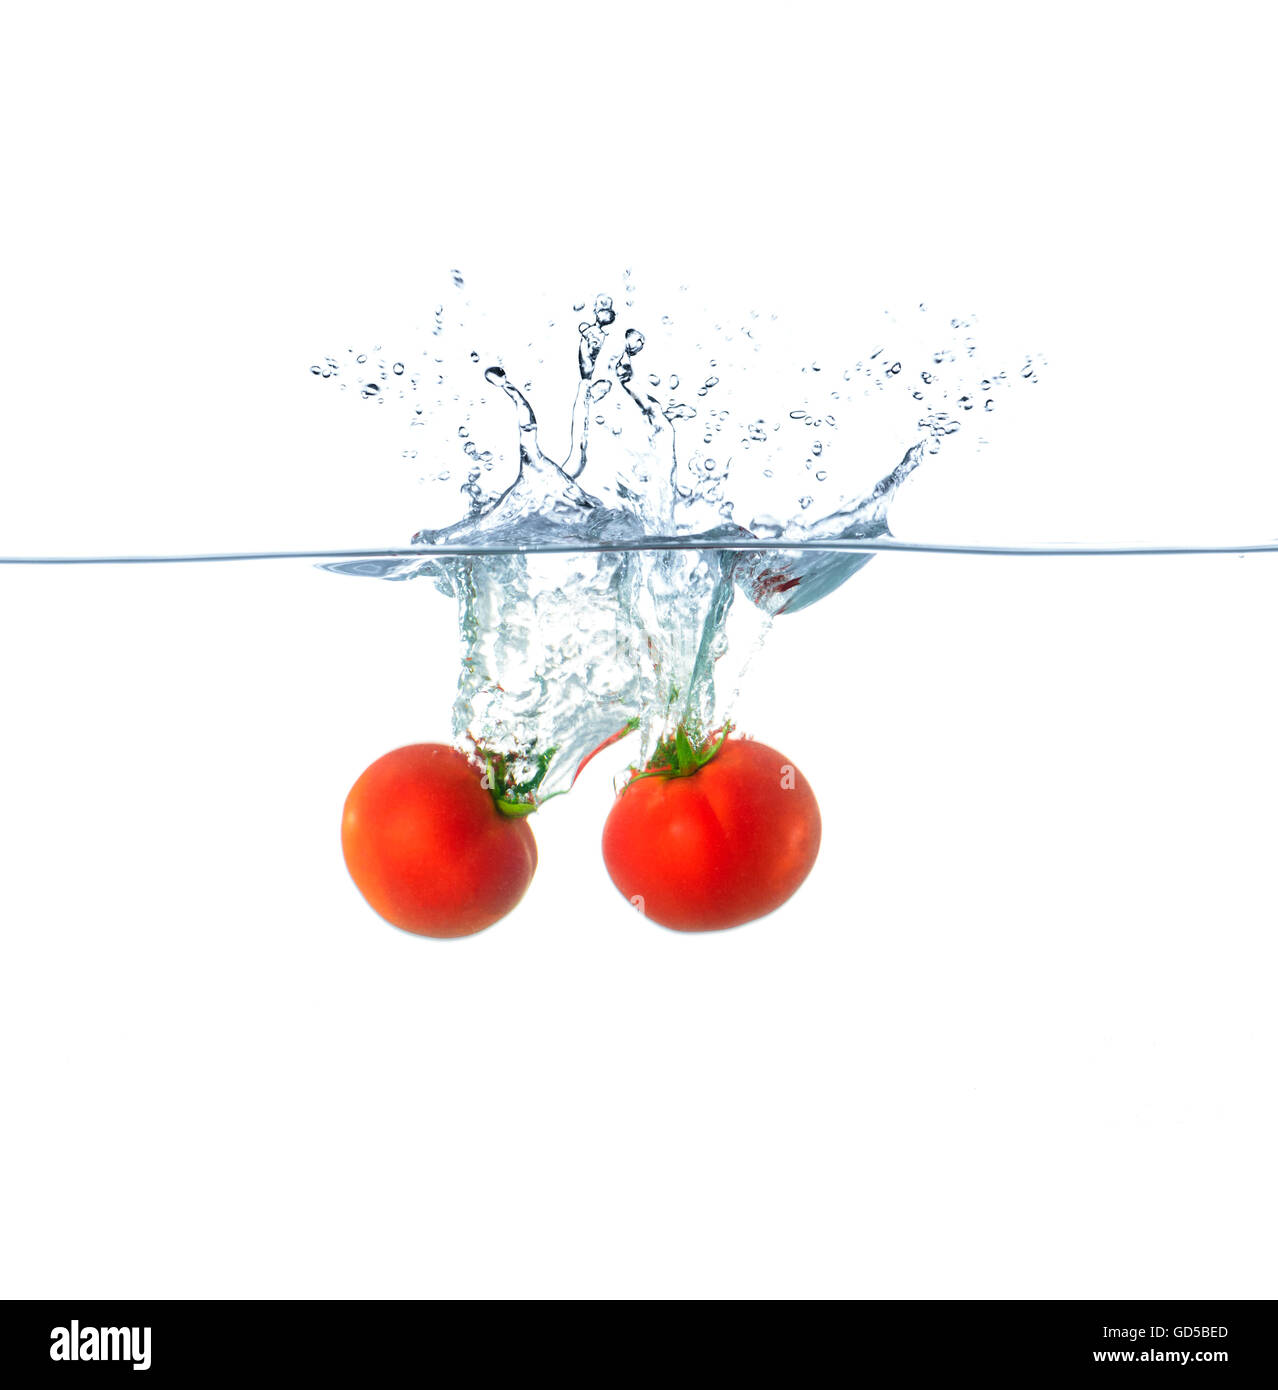 Red Tomato Splash in Water Isolated on White Background Stock Photo